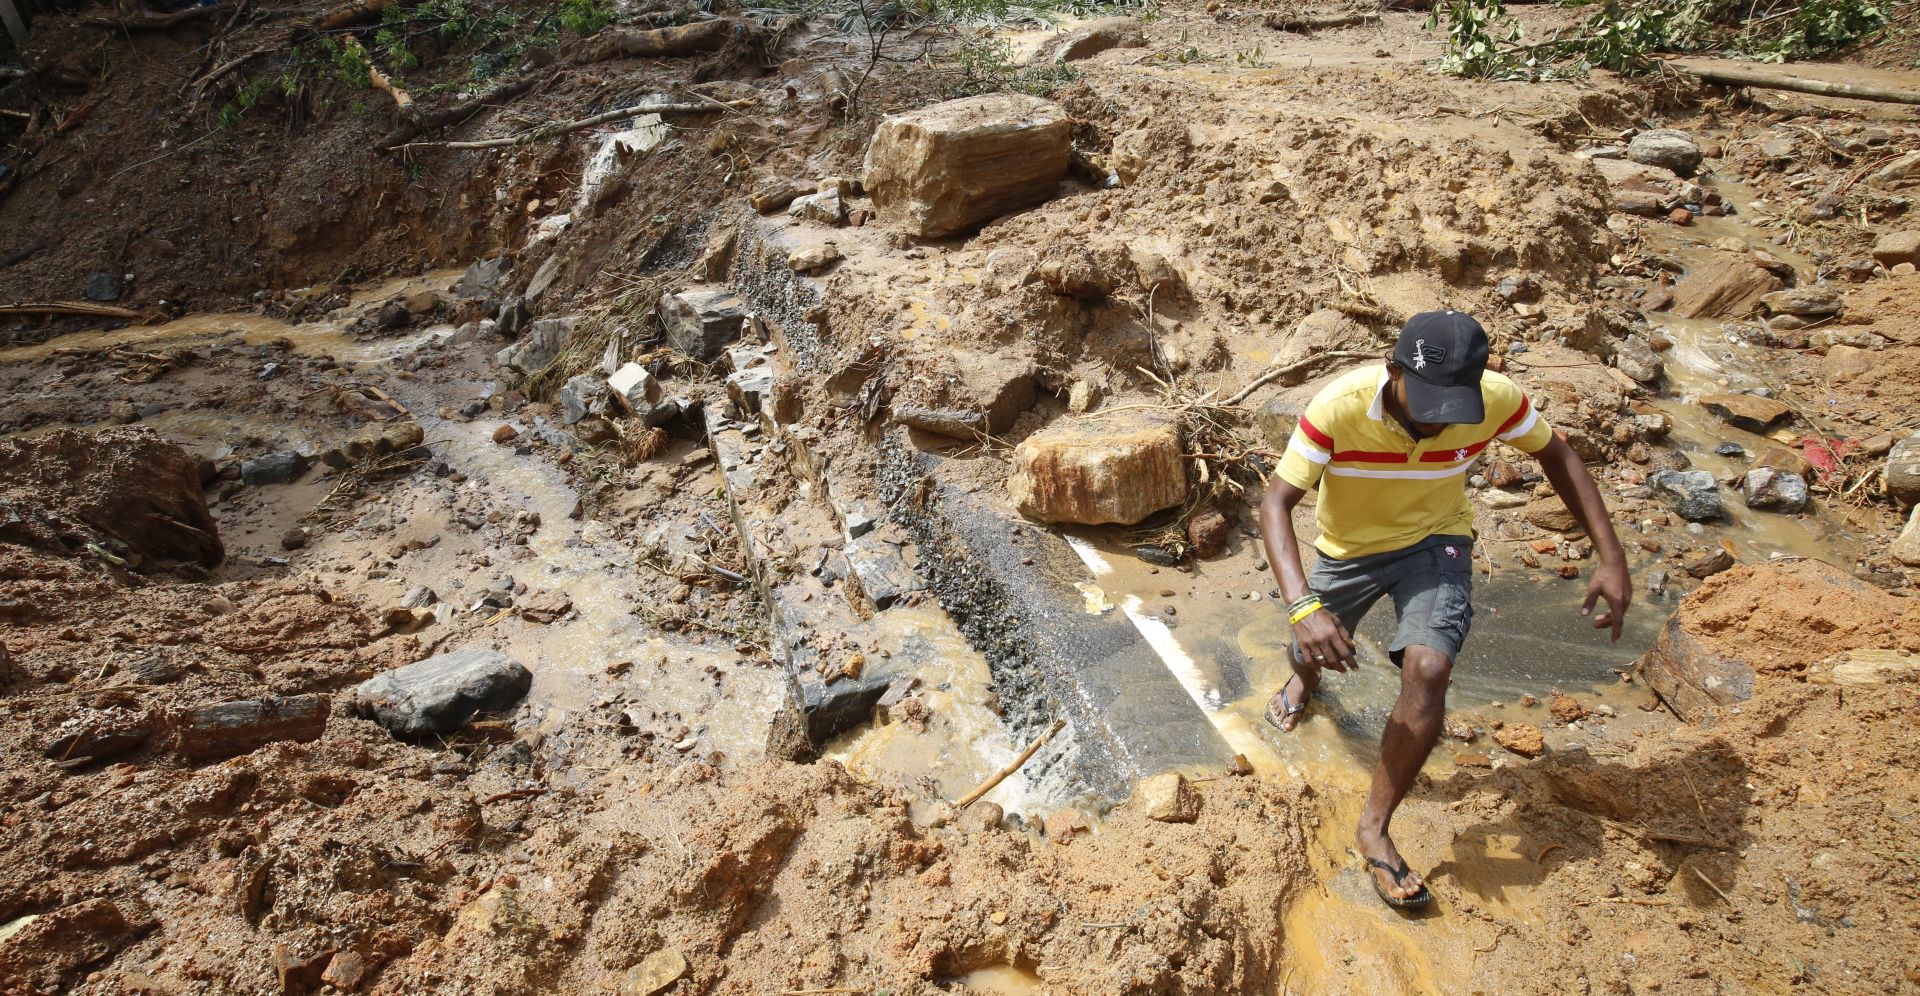 epa05994746 A road is completely damaged as a man walks past at the area where a landslide occured in which 35 people are feared killed at Athwelthote in Baduraliya, some 98 kilometers from Colombo, Sri Lanka, 28 May 2017. Following a prolonged drought Sri Lanka has been hit with the monsoonal rains for the past few days causing heavy flooding and landslides in several parts of the island including its capital Colombo. The government's Disaster Management Centre confirmed that 100 deaths have been reported while 99 are missing and over 53,000 have been displaced.  EPA/M.A.PUSHPA KUMARA